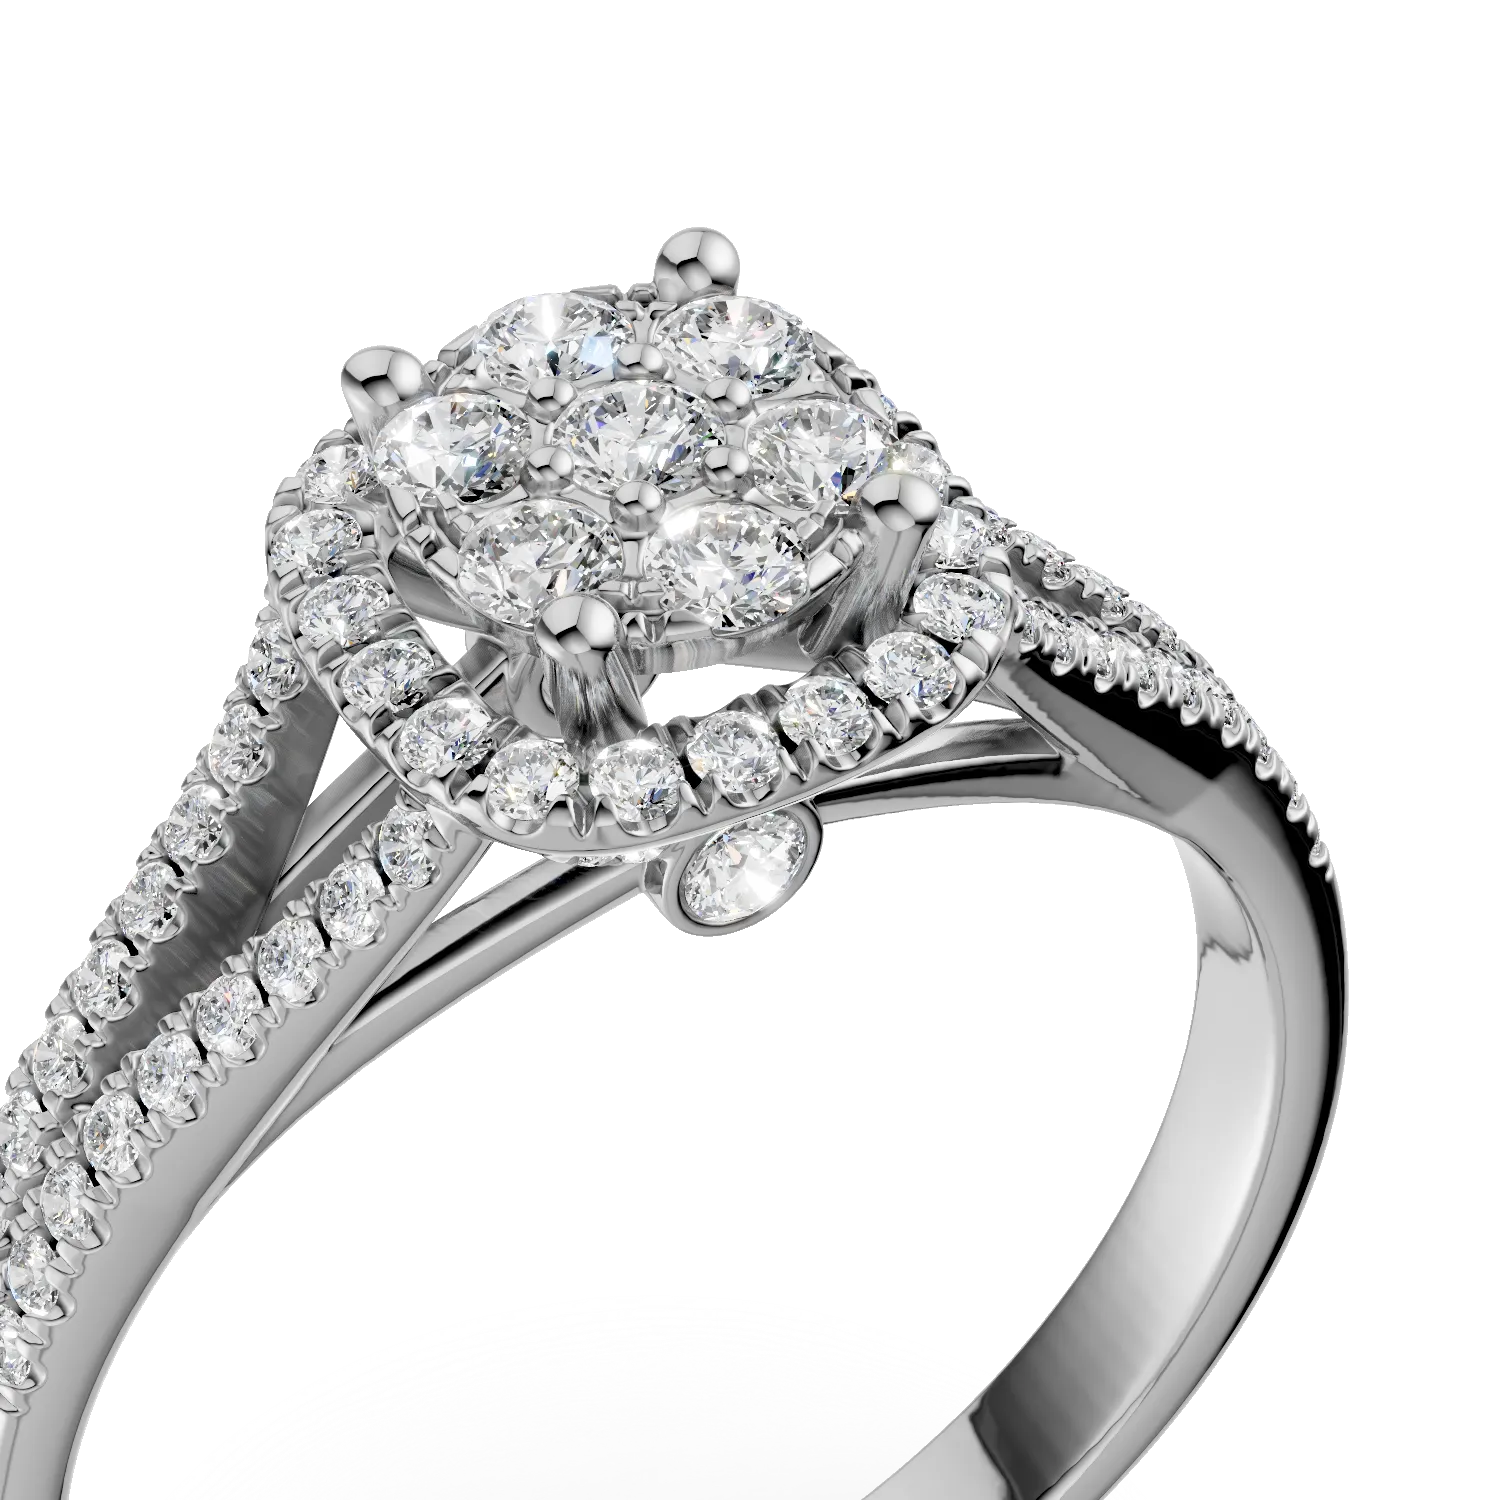 White gold engagement ring with 0.52ct diamonds